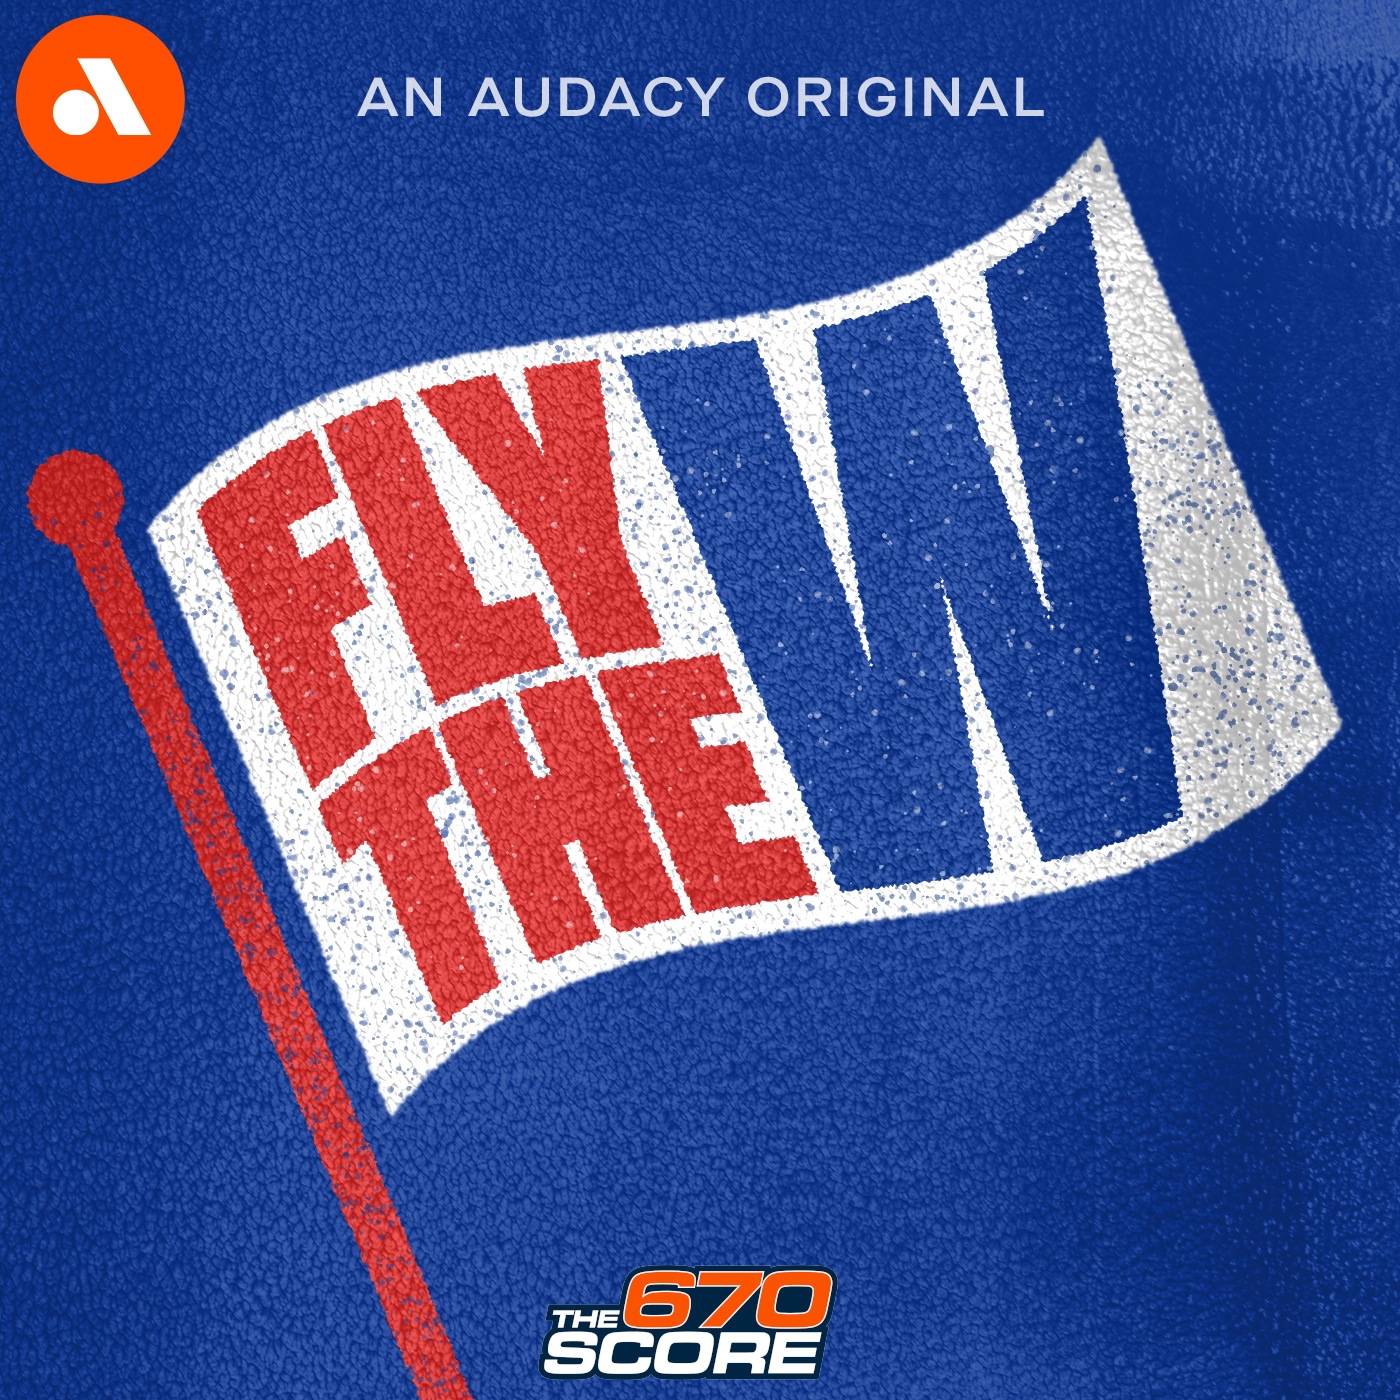 BONUS: Jed Hoyer Is Missing | 'Fly The W'